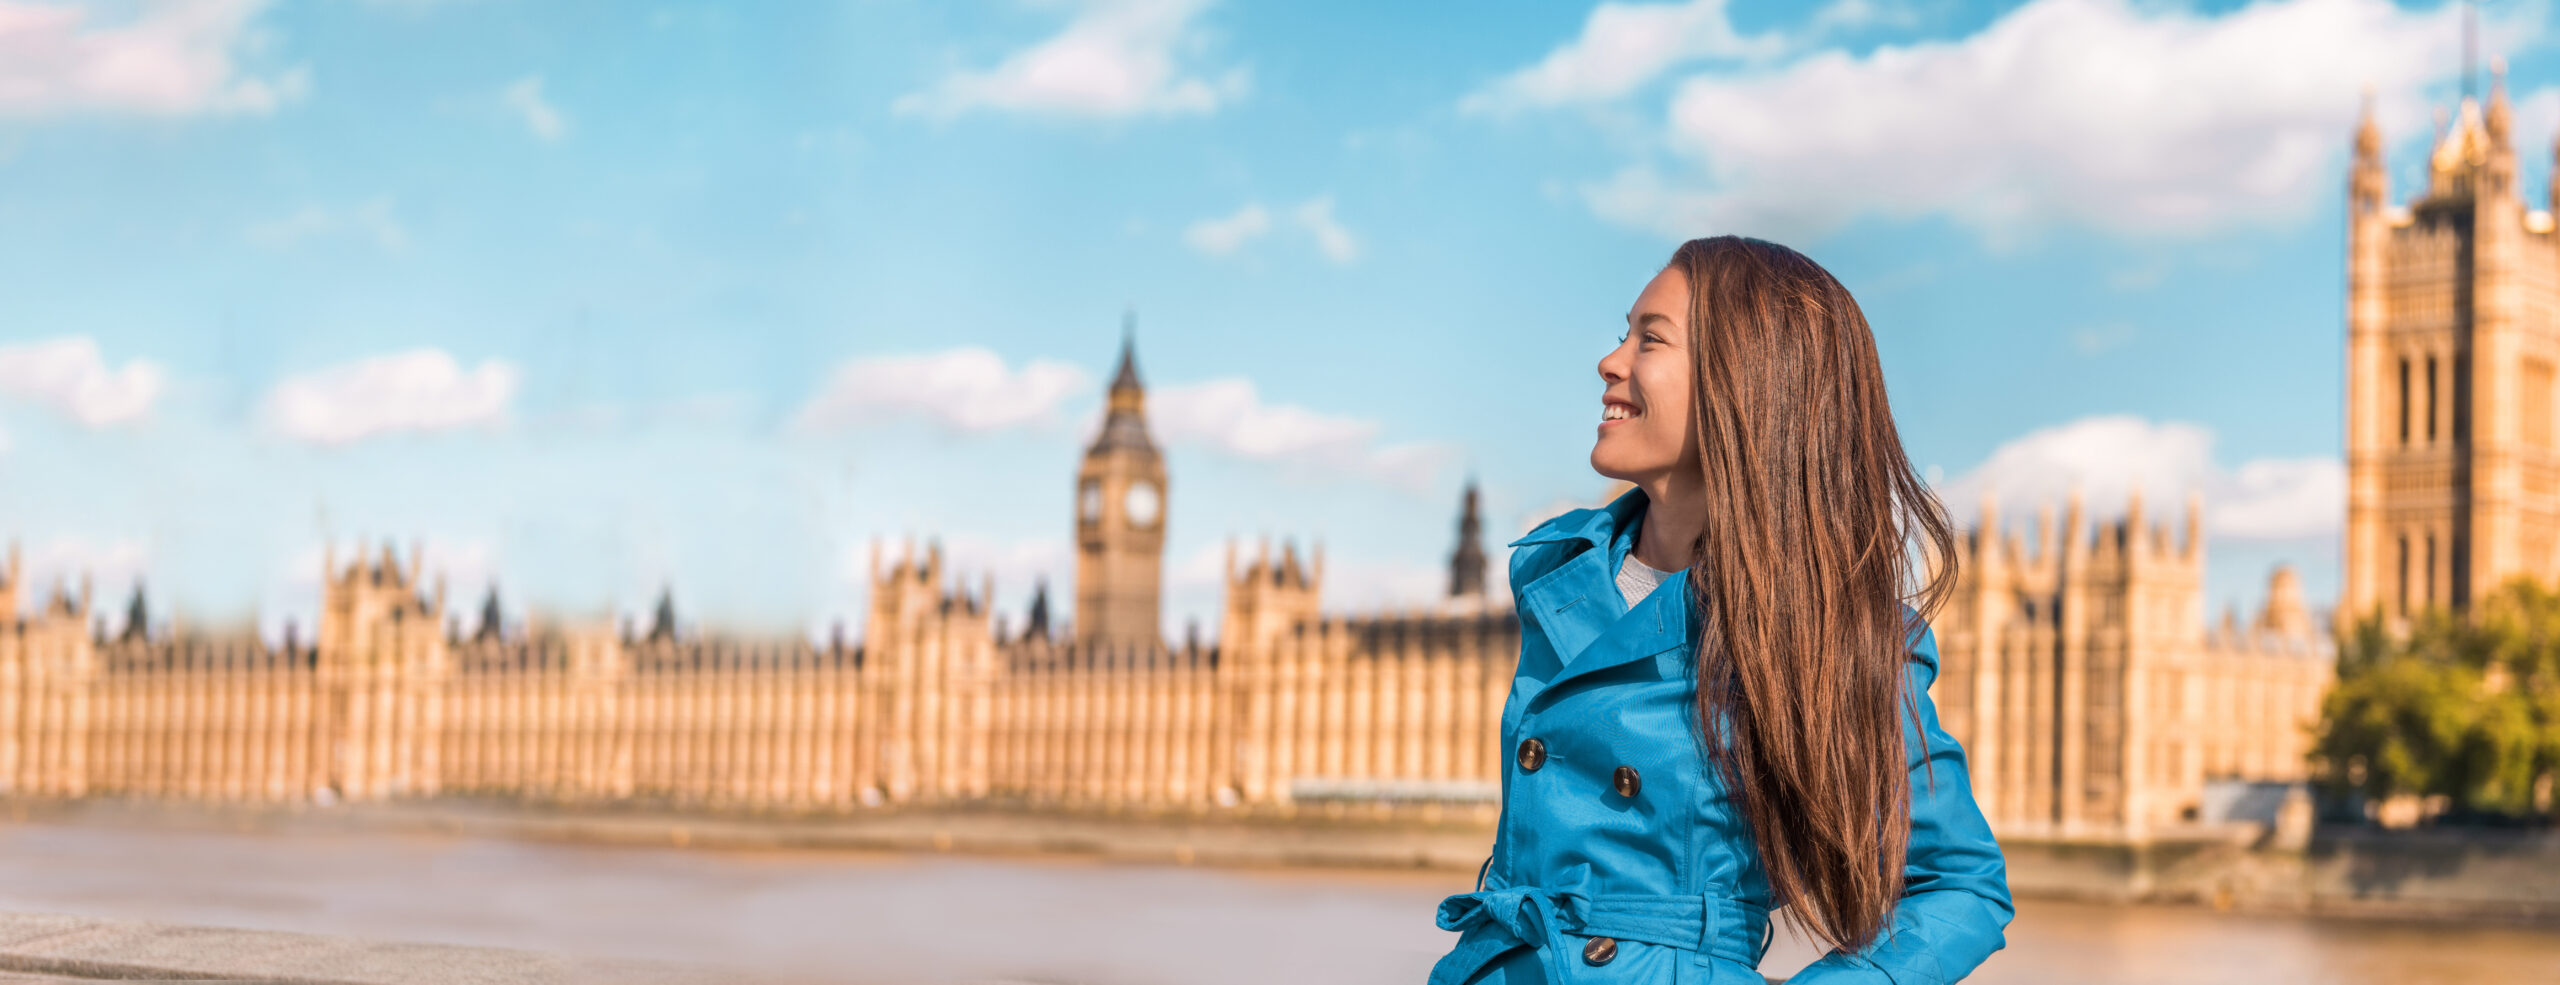 Girl in a blue coat with Big Ben & Houses of Parliament in the background